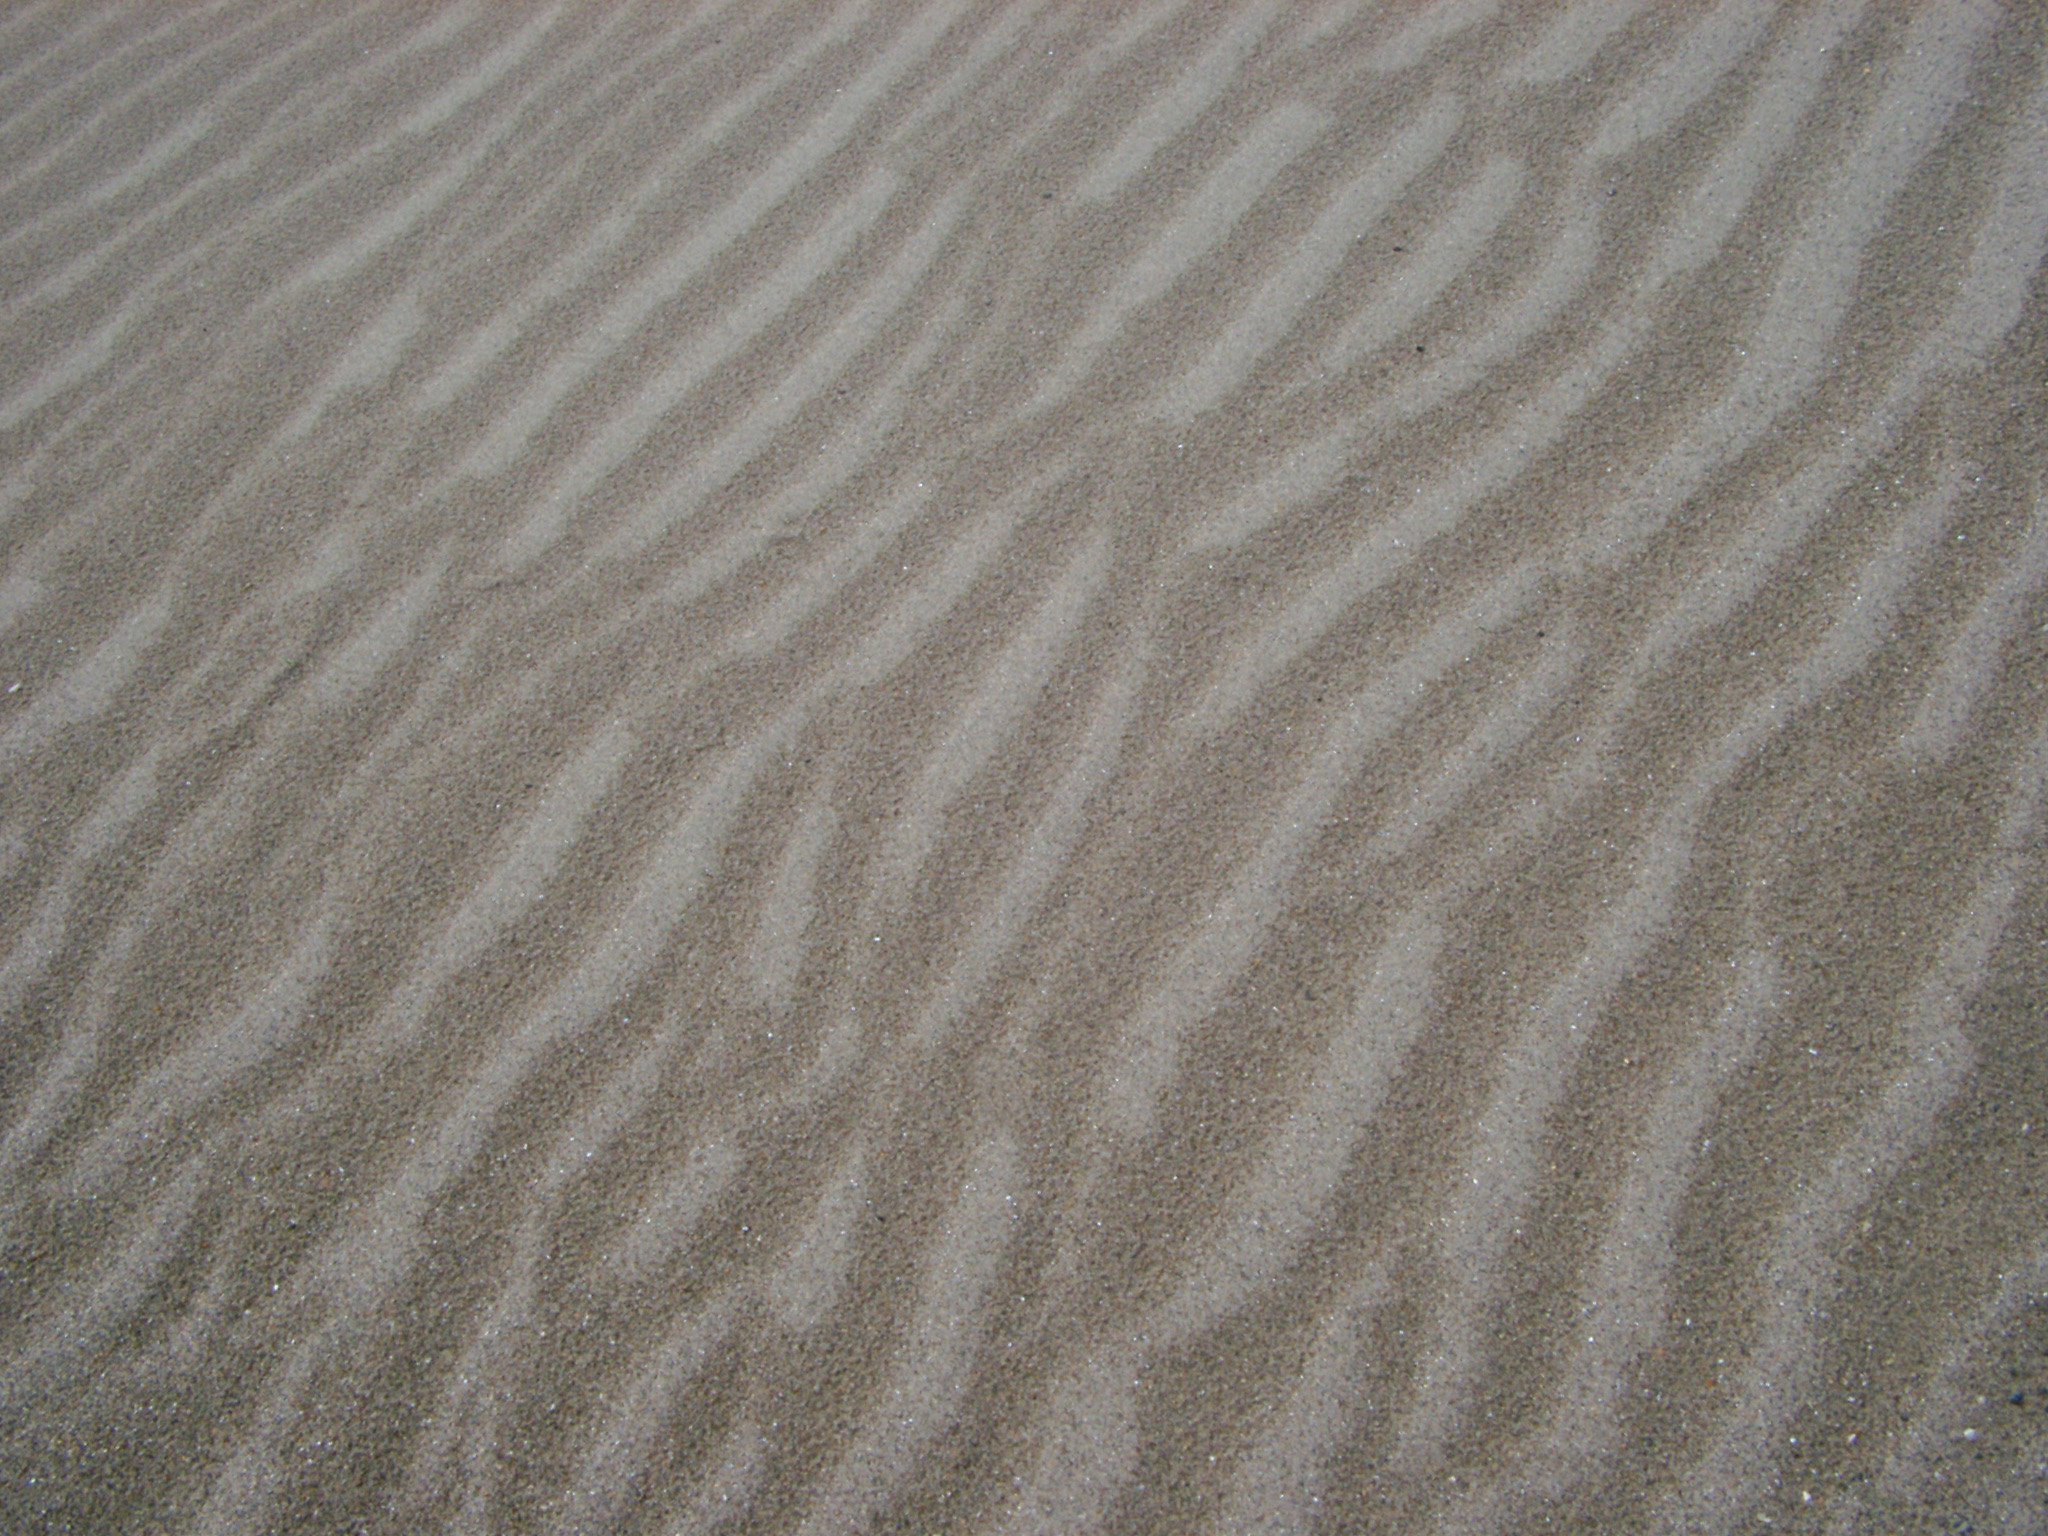 Free Stock photo of Textured Beach Sand with Abstract Design ...